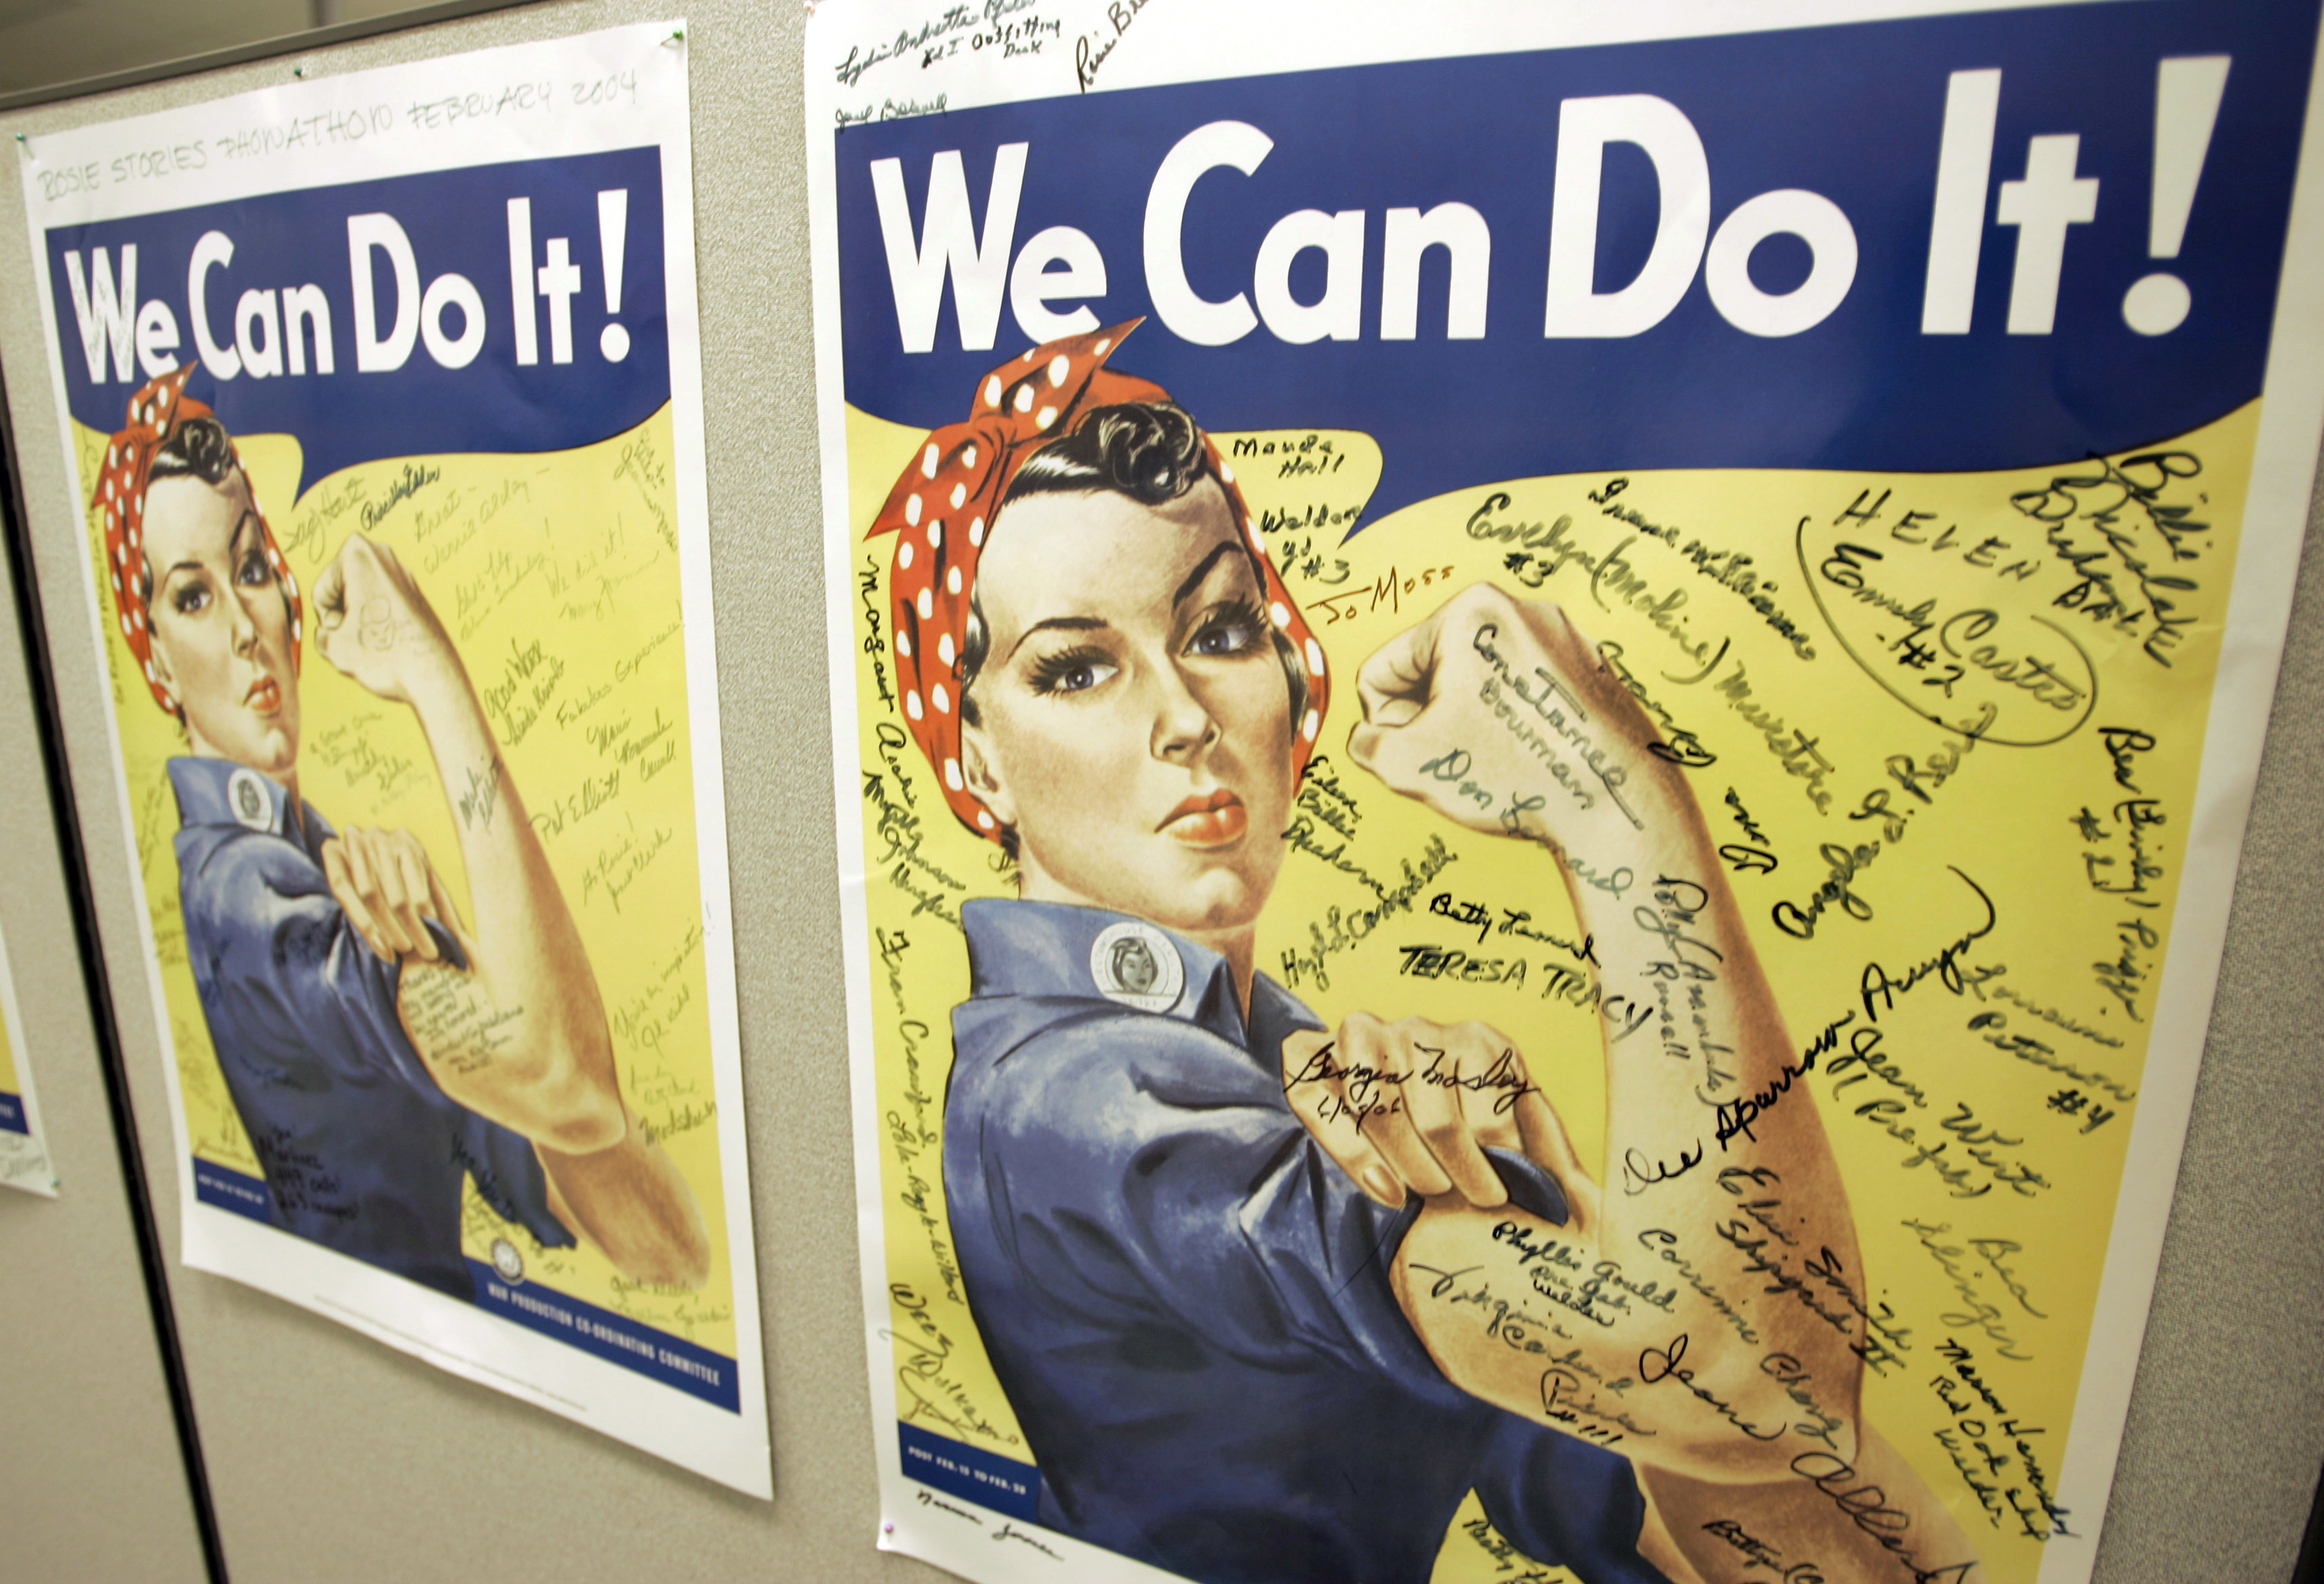 A Rosie the Riveter poster.